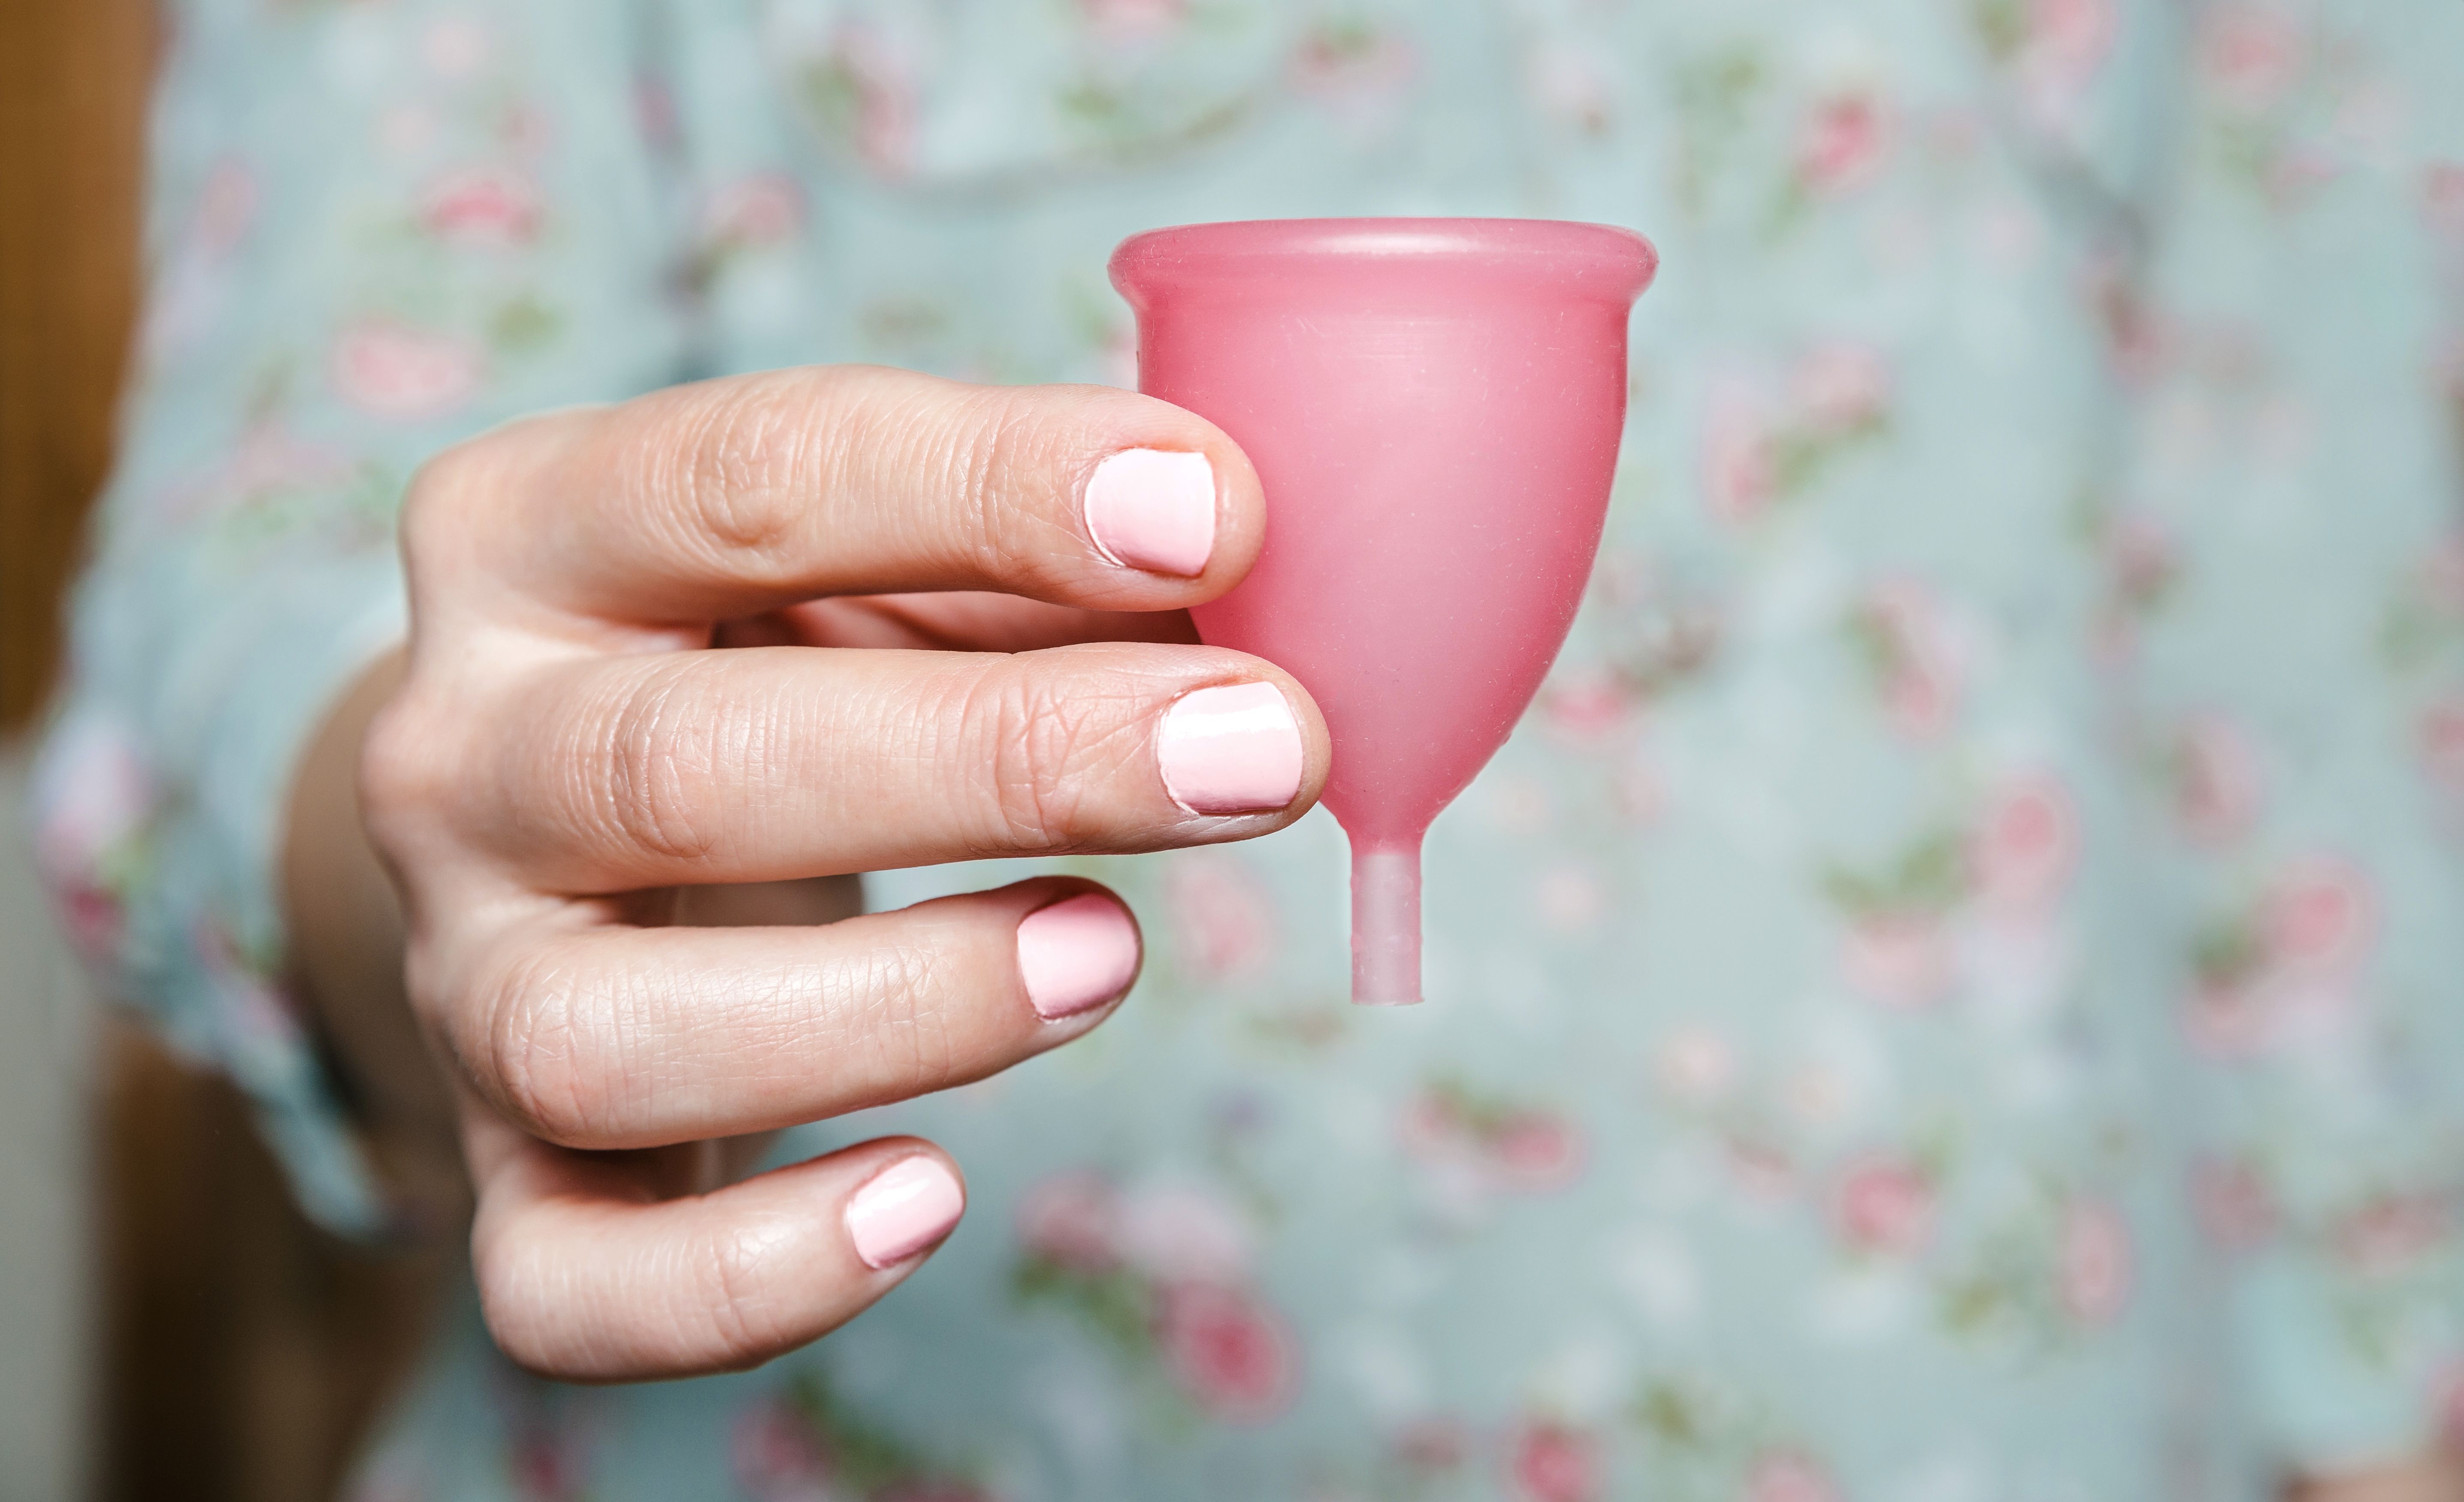 Menstrual cups: what are they and how do you use them?